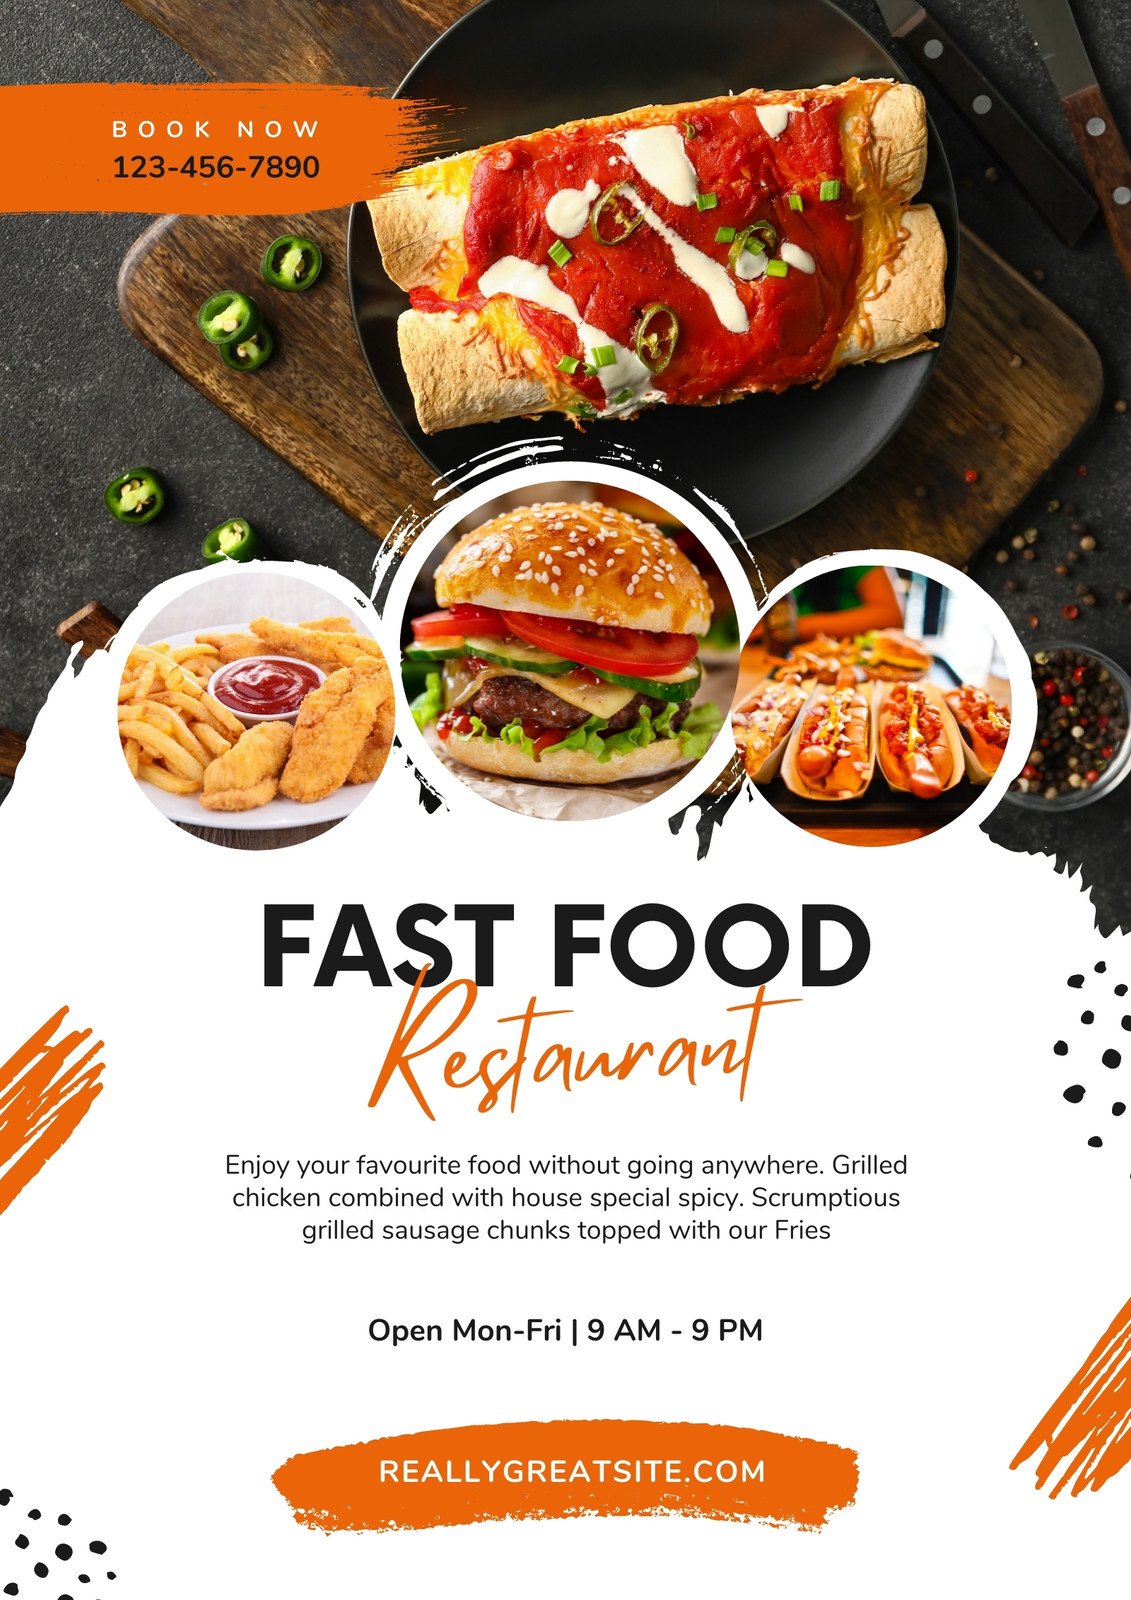 Fast Food Special Flyer Design PSD Template Free Download 57% OFF